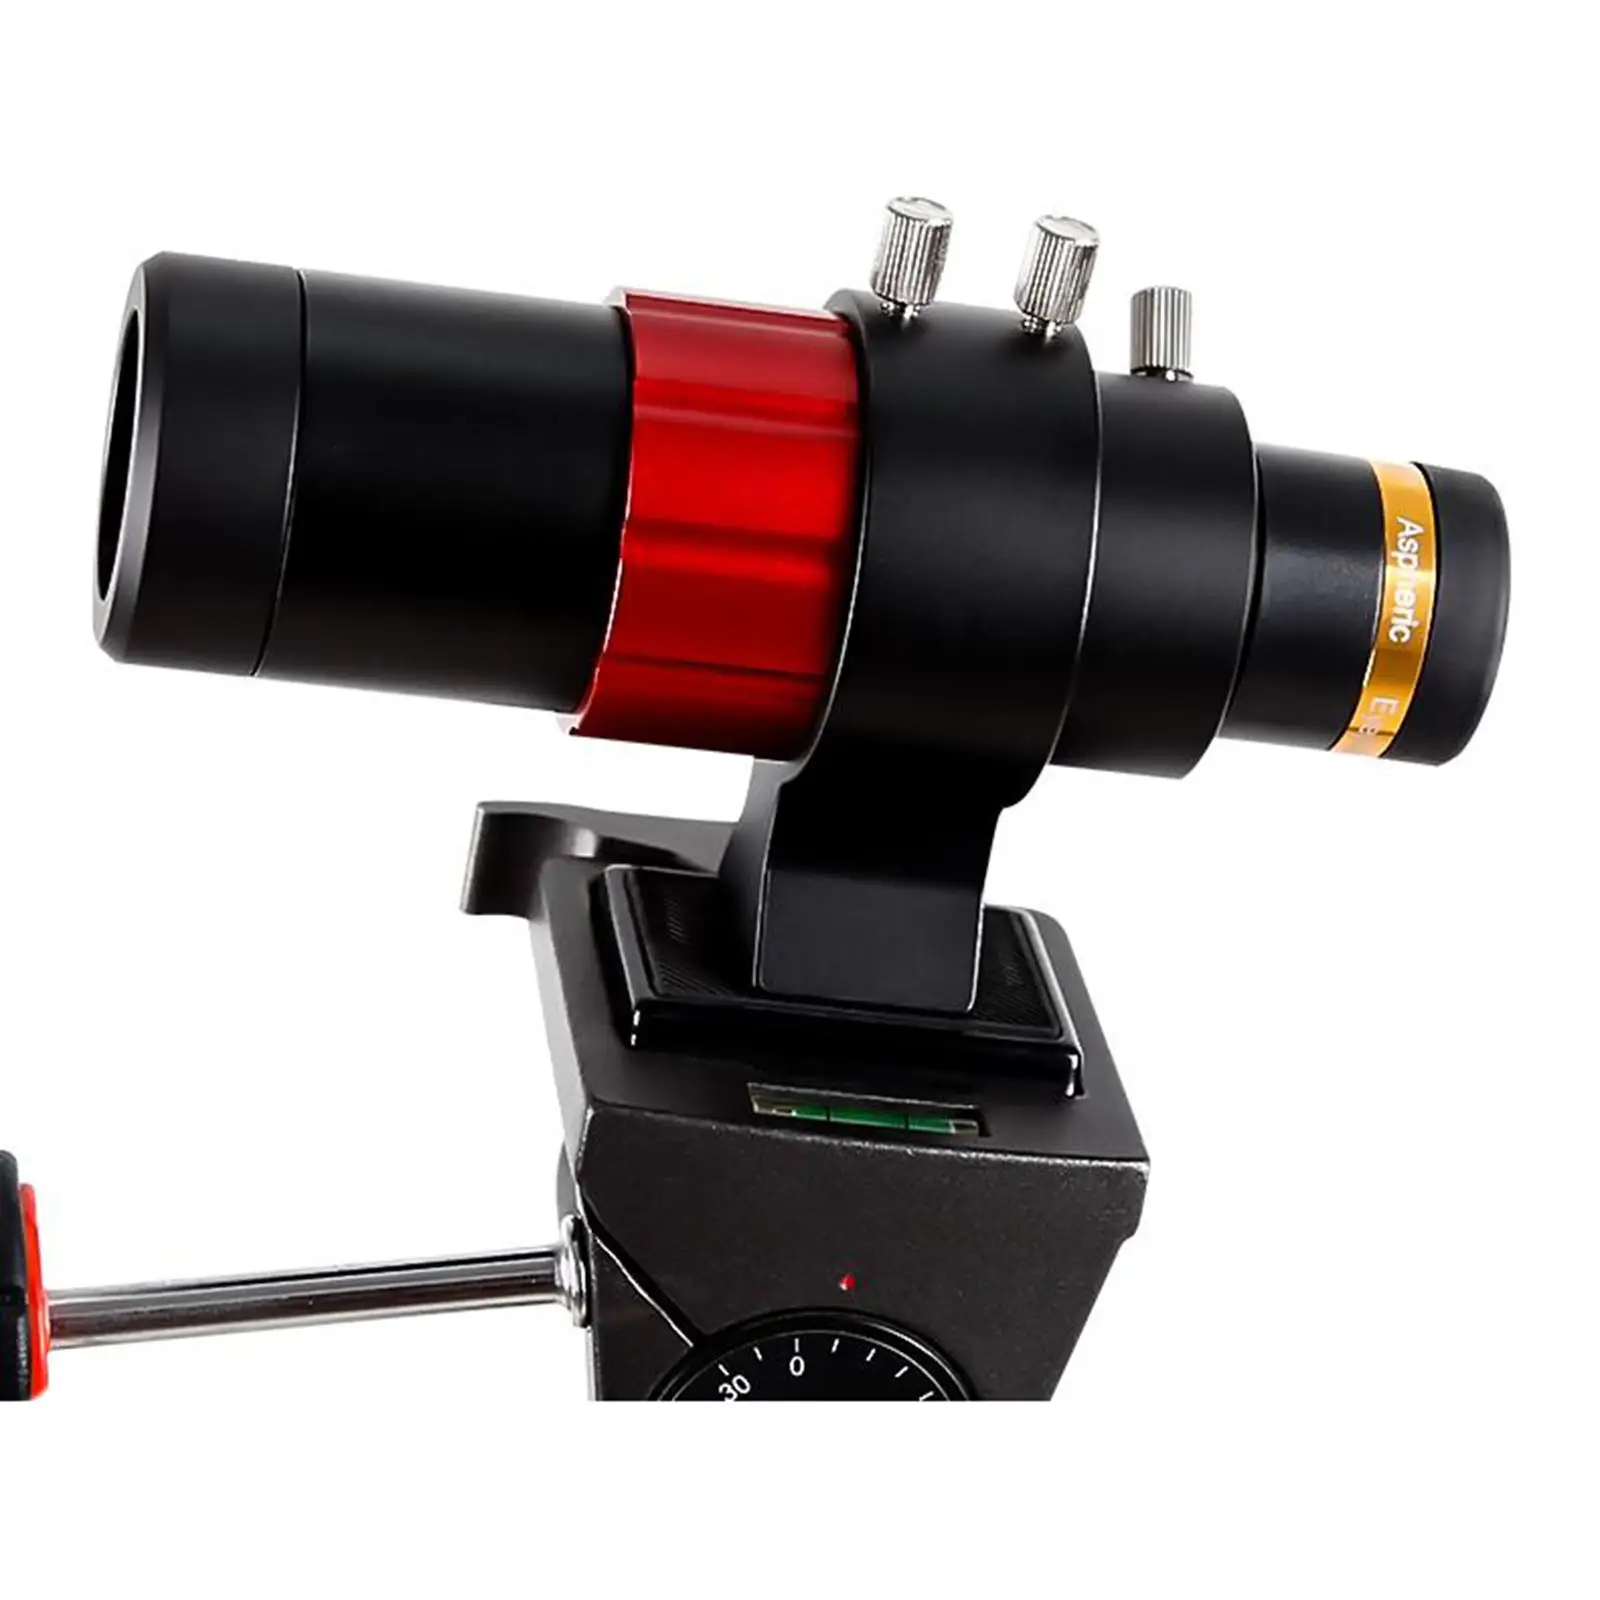 Compact Deluxe Guidescope &Guiding Bracket for Astrophotography